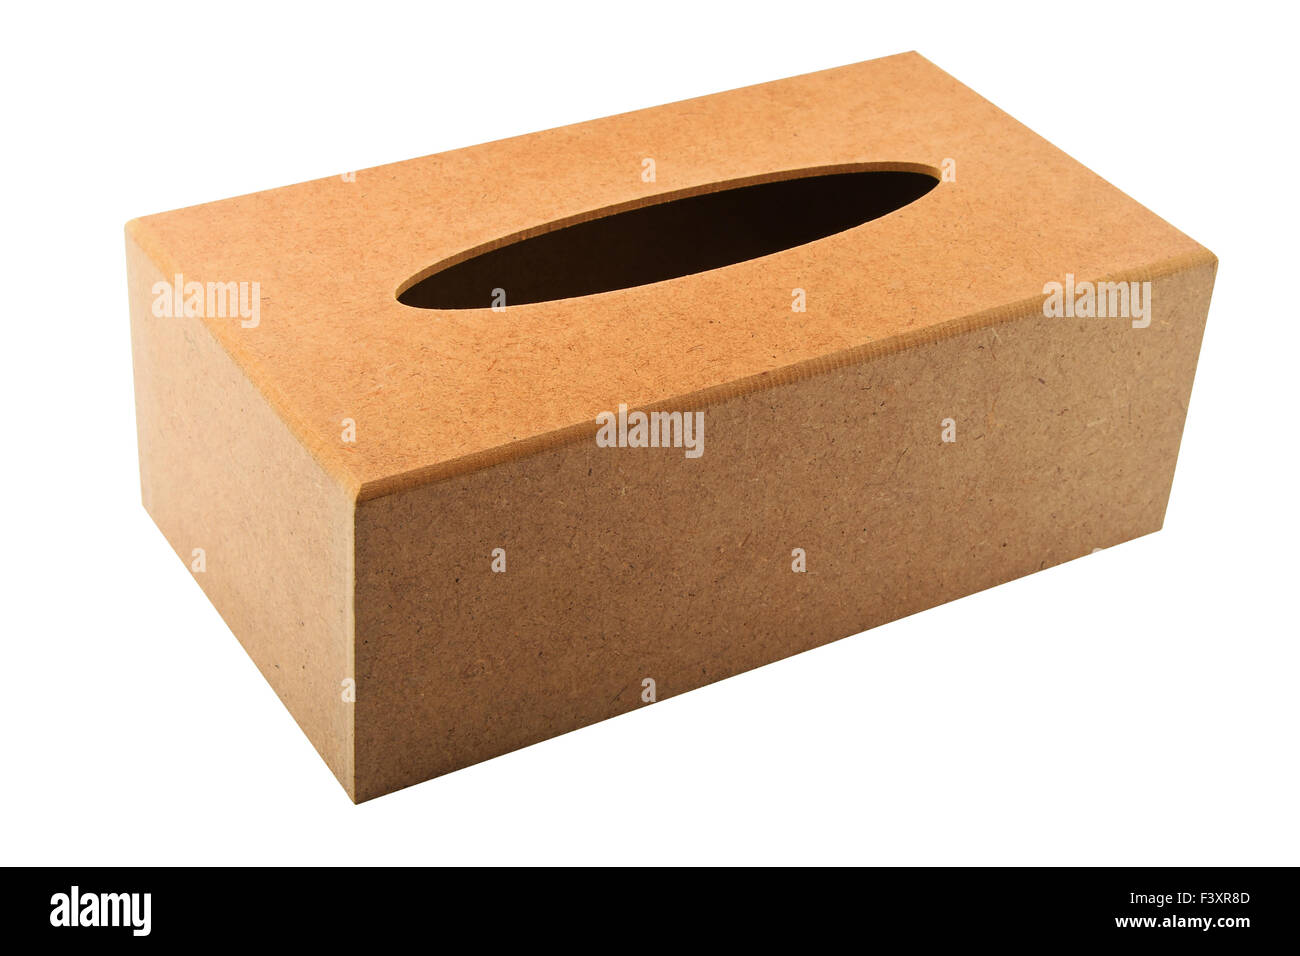 Paper tissues replacement handmade wooden dispenser box isolated on white Stock Photo